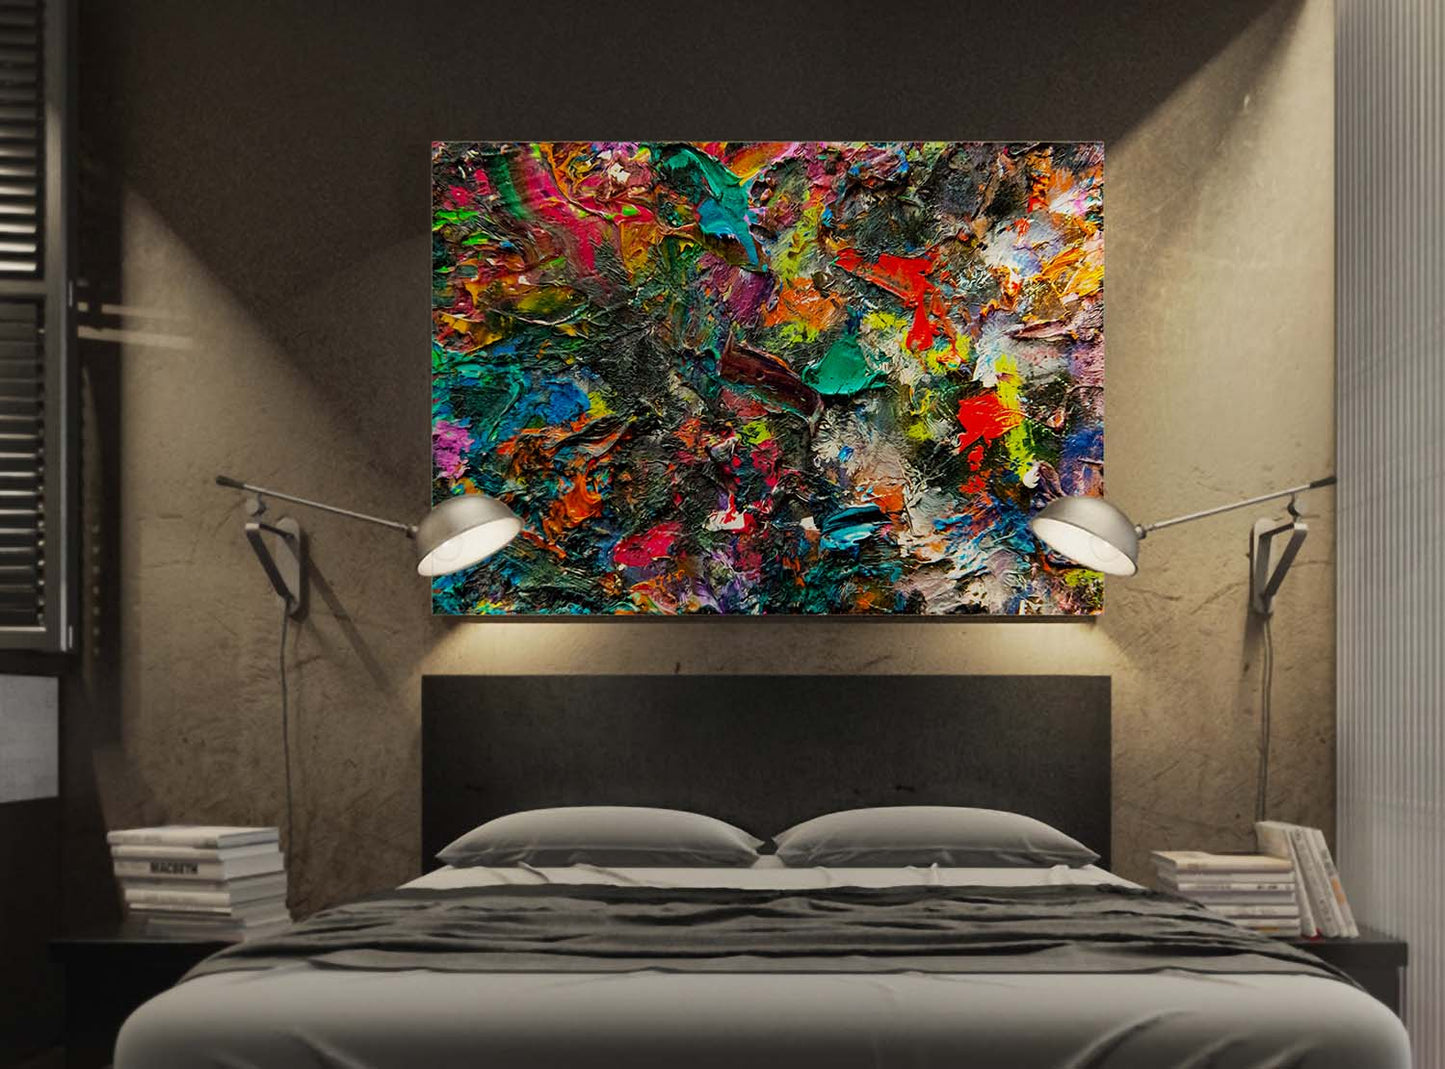 Vid-19 Organic Spackle art print over a large bed with reading lamps